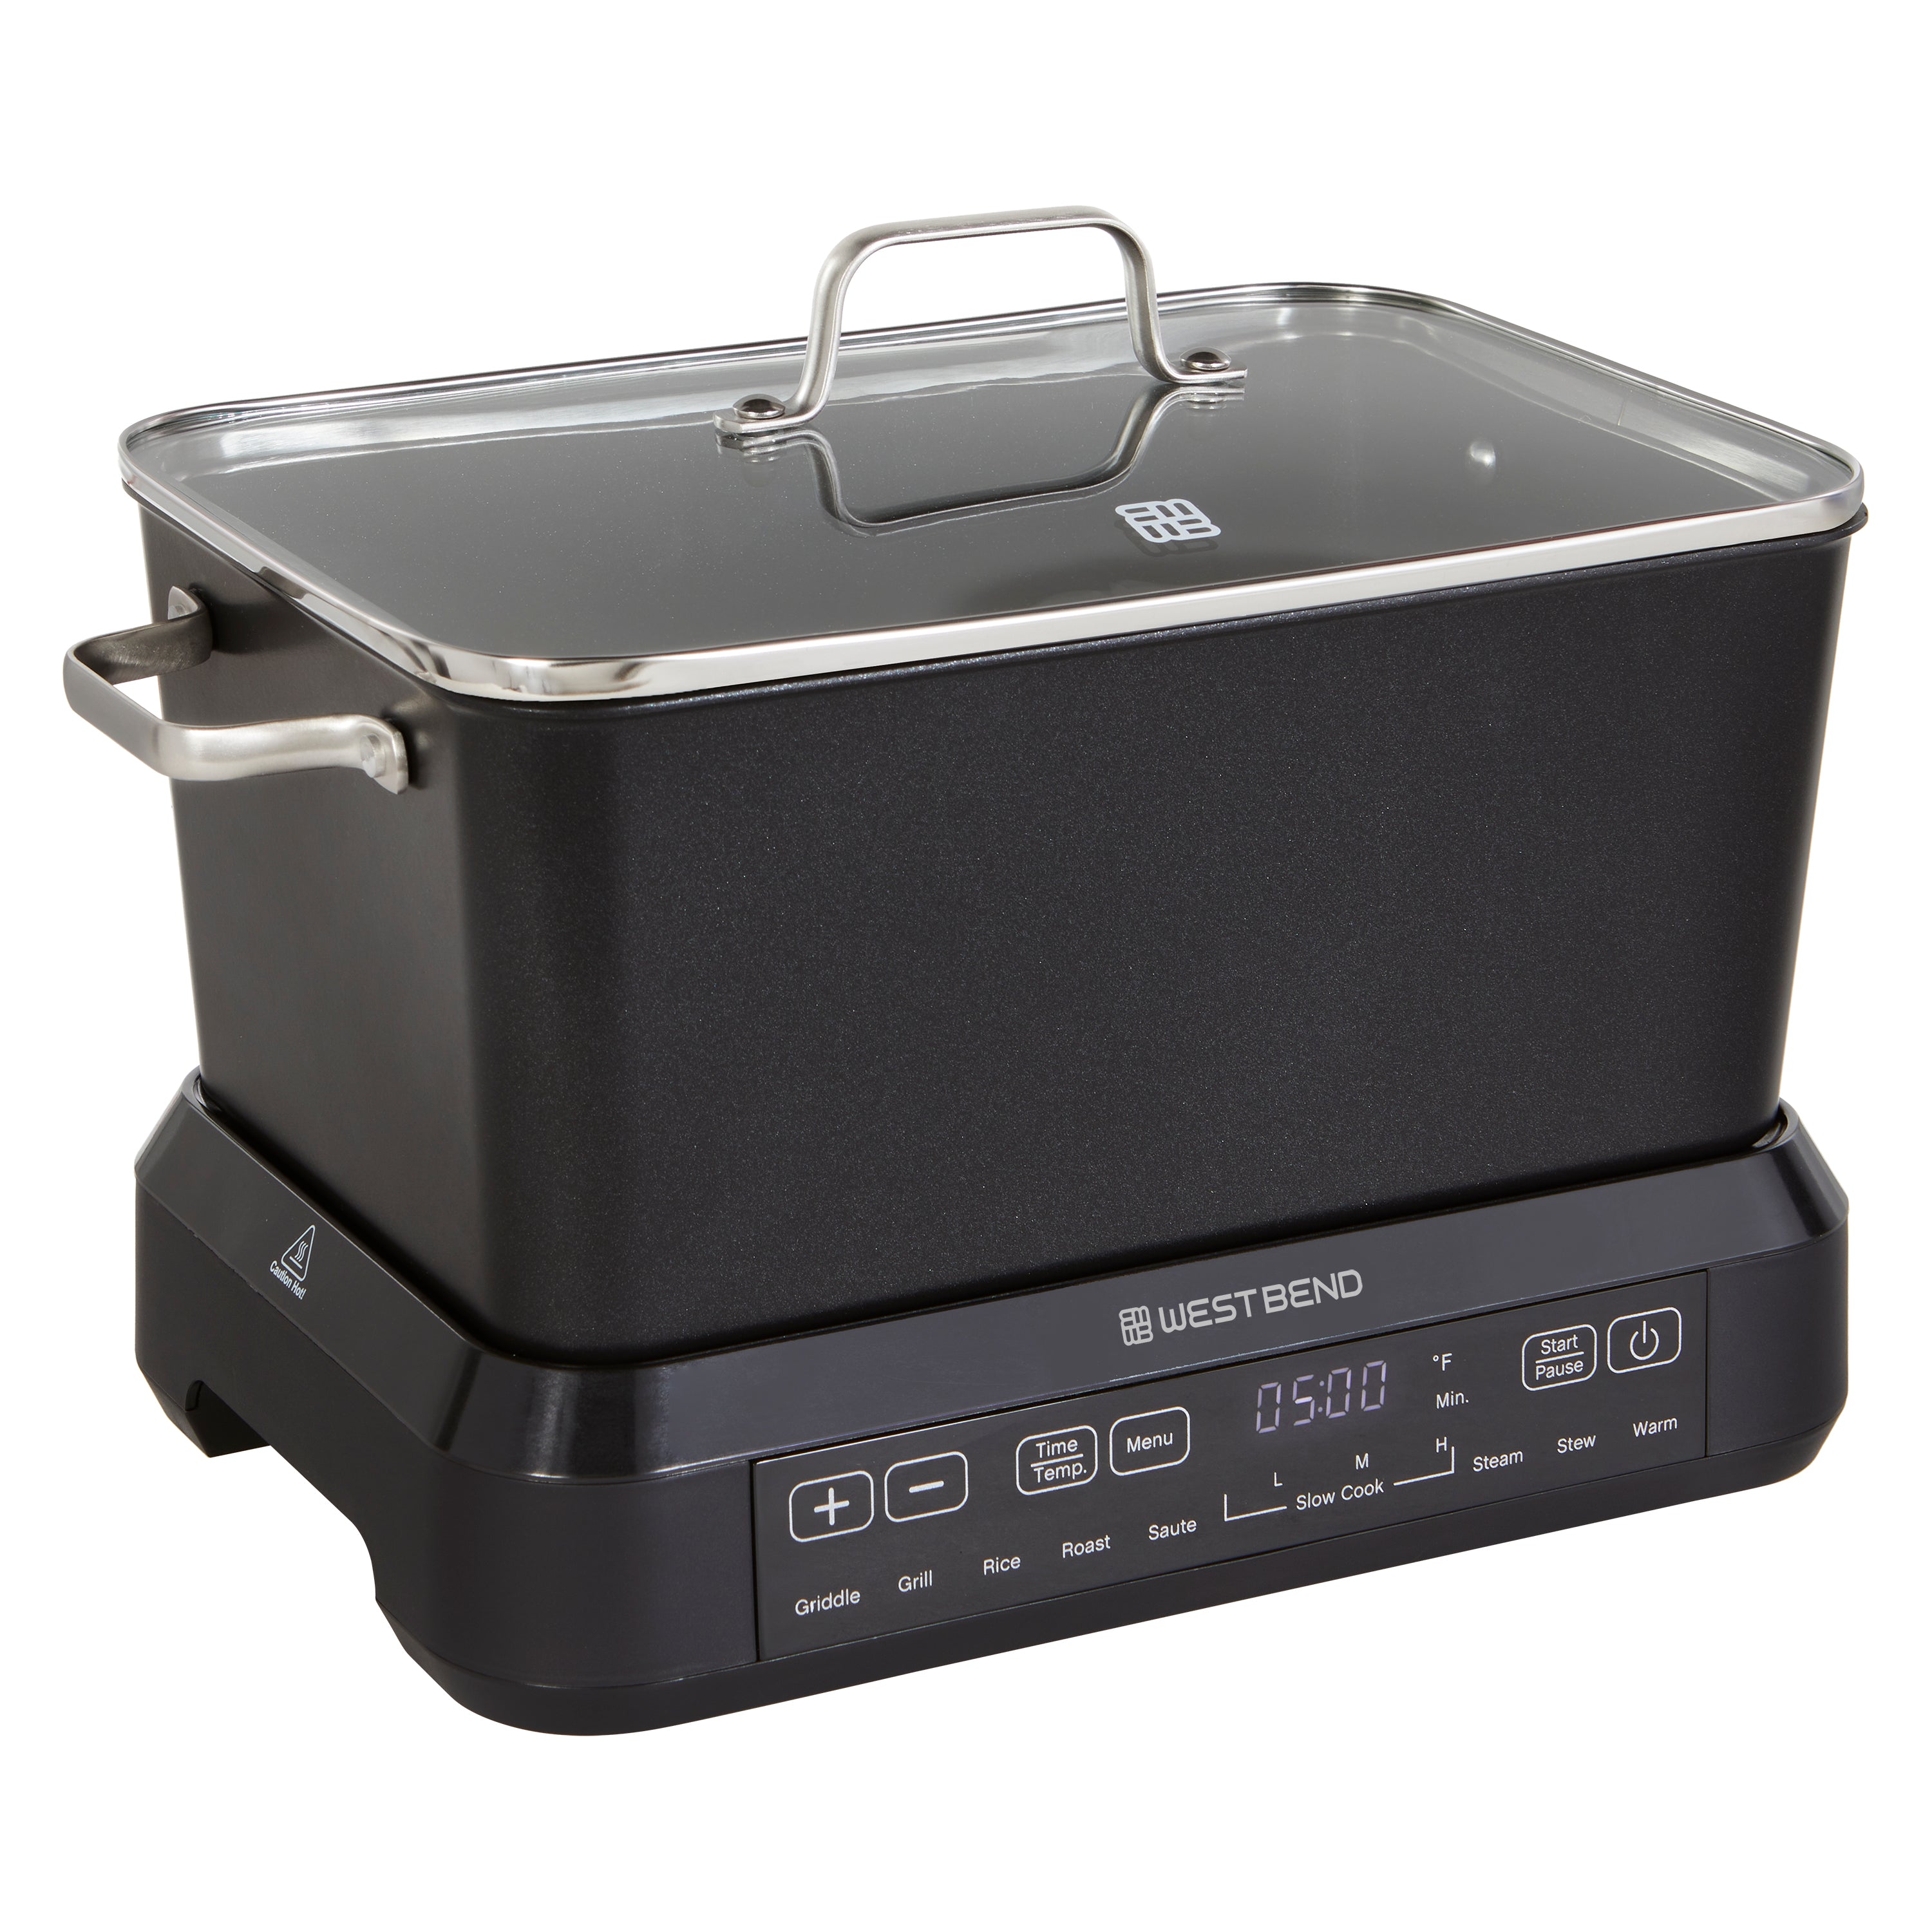 West Bend® 5 Qt. Versatility Cooker™ Stainless Steel